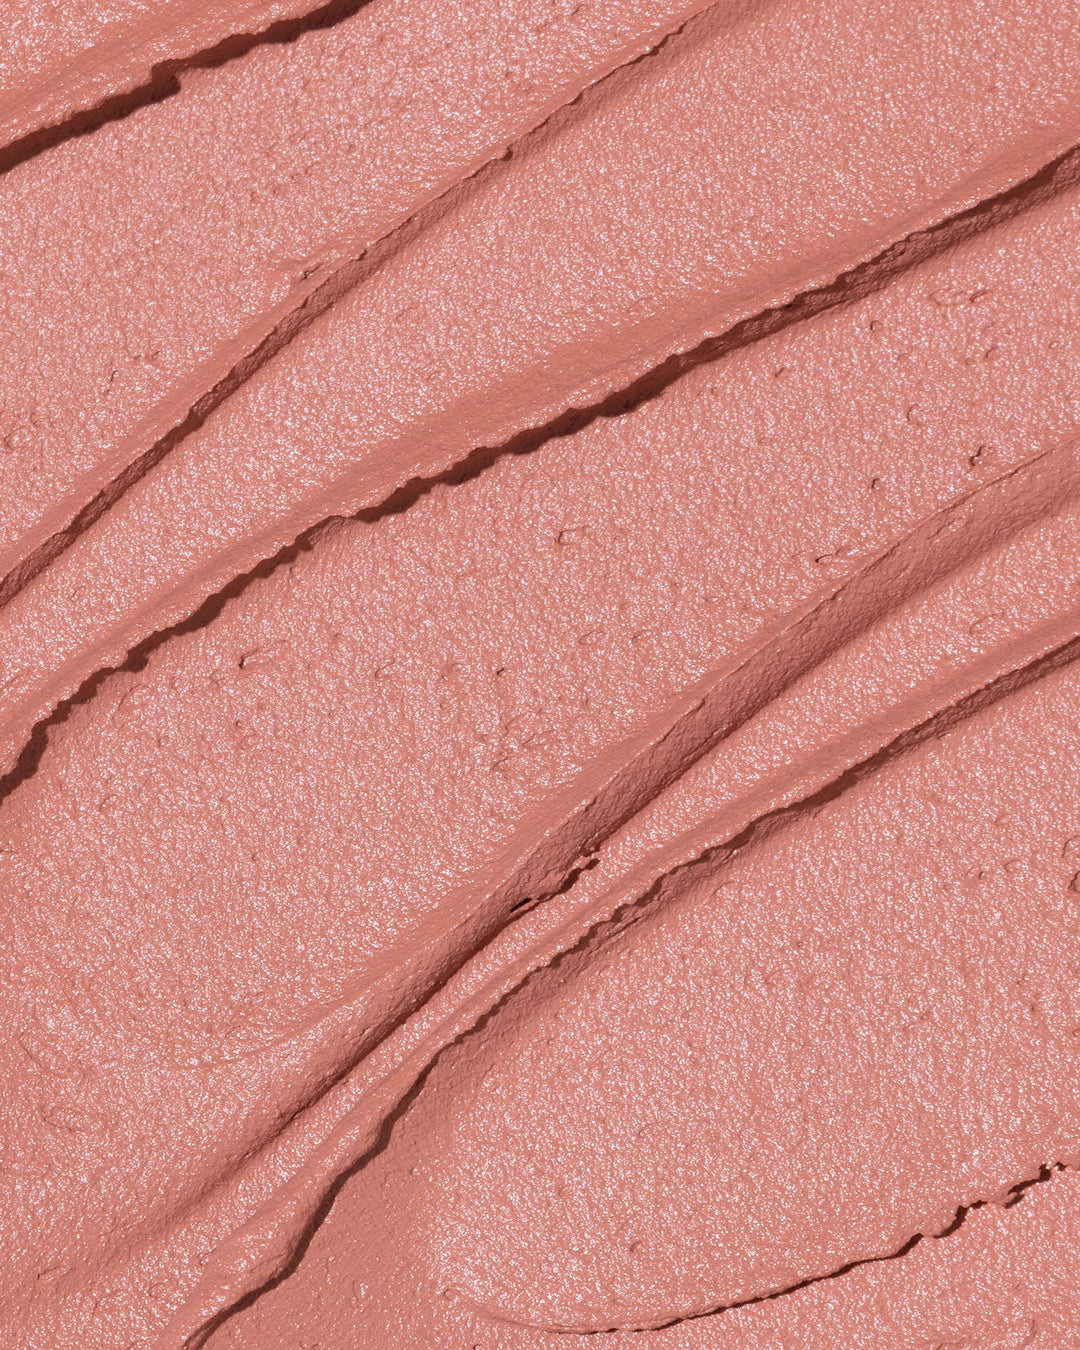 Swatch of Plush Velvet Mousse Lipstick. Beautiful sea of soft pink for a great everyday look.